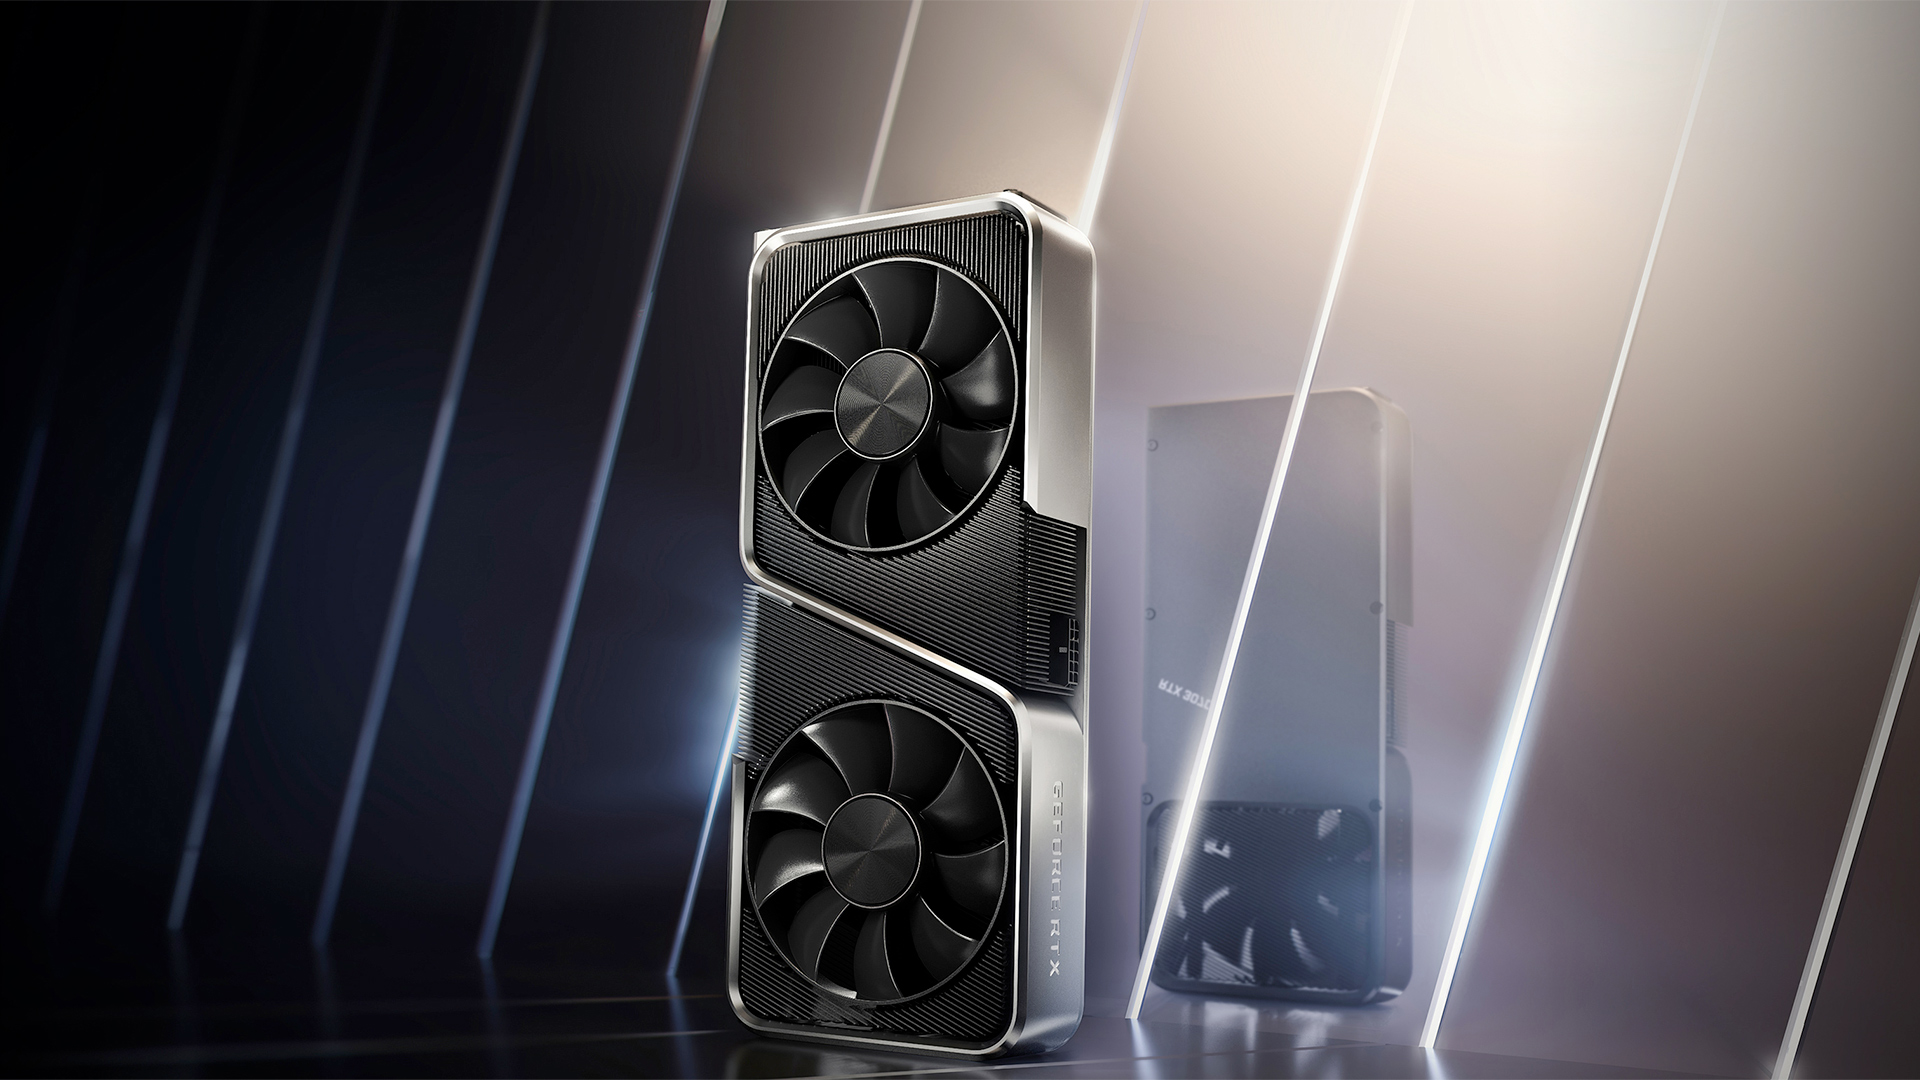 unconfirmed-rumors-circulate-of-nvidia’s-geforce-rtx-3070-ti-and-geforce-rtx-3080-ti-launch-dates